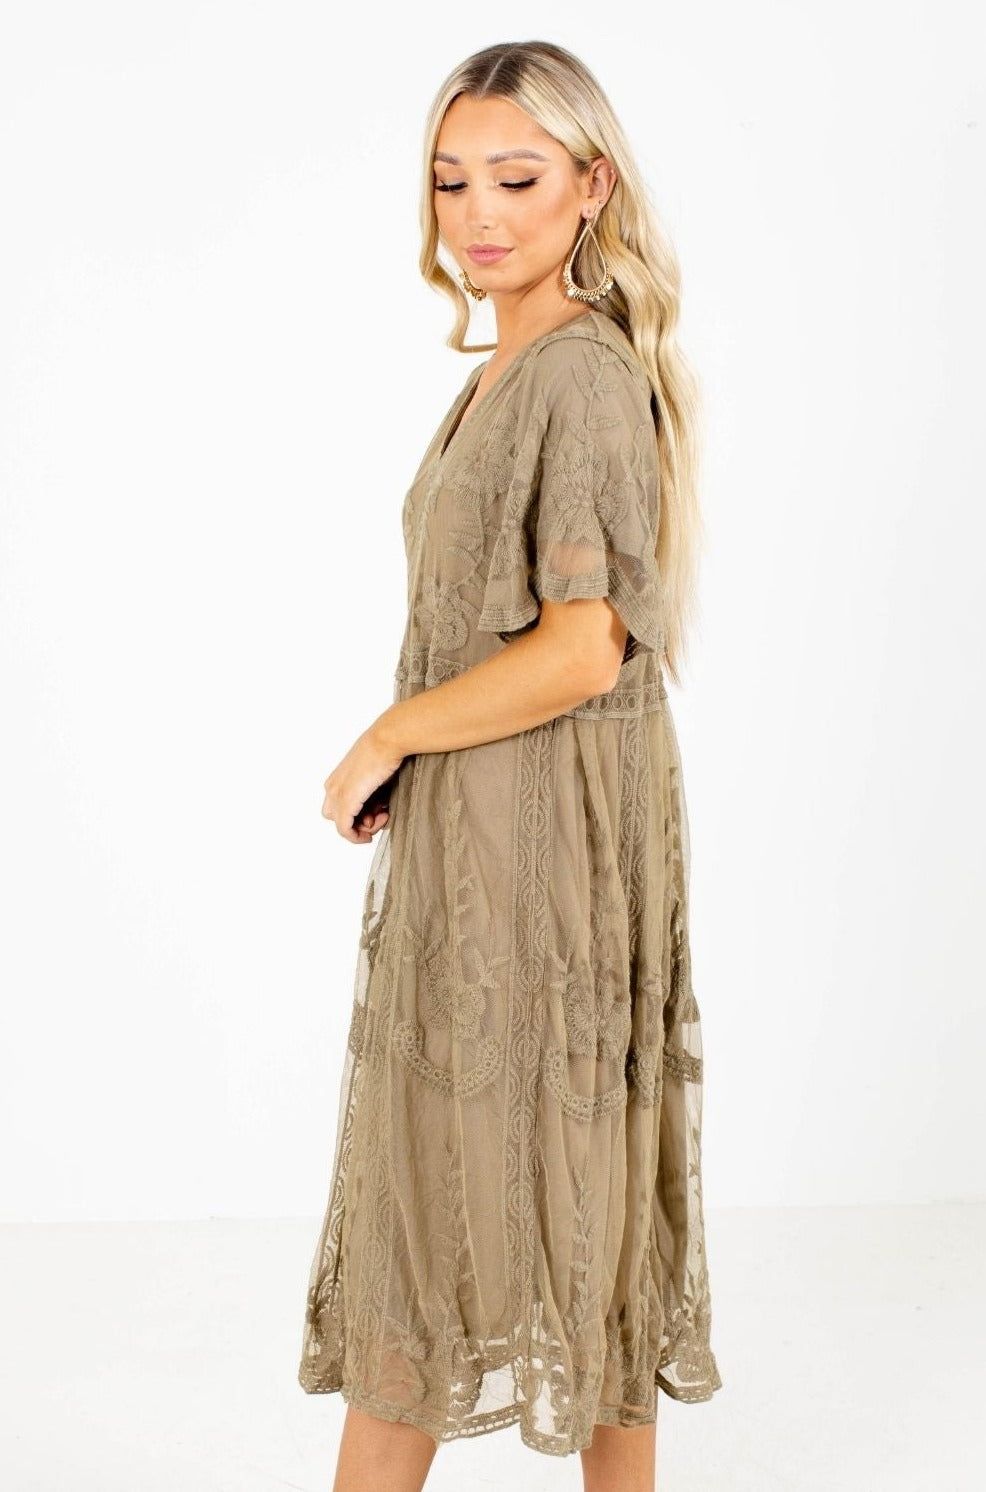 Muted Olive Green Lace Boutique Dress